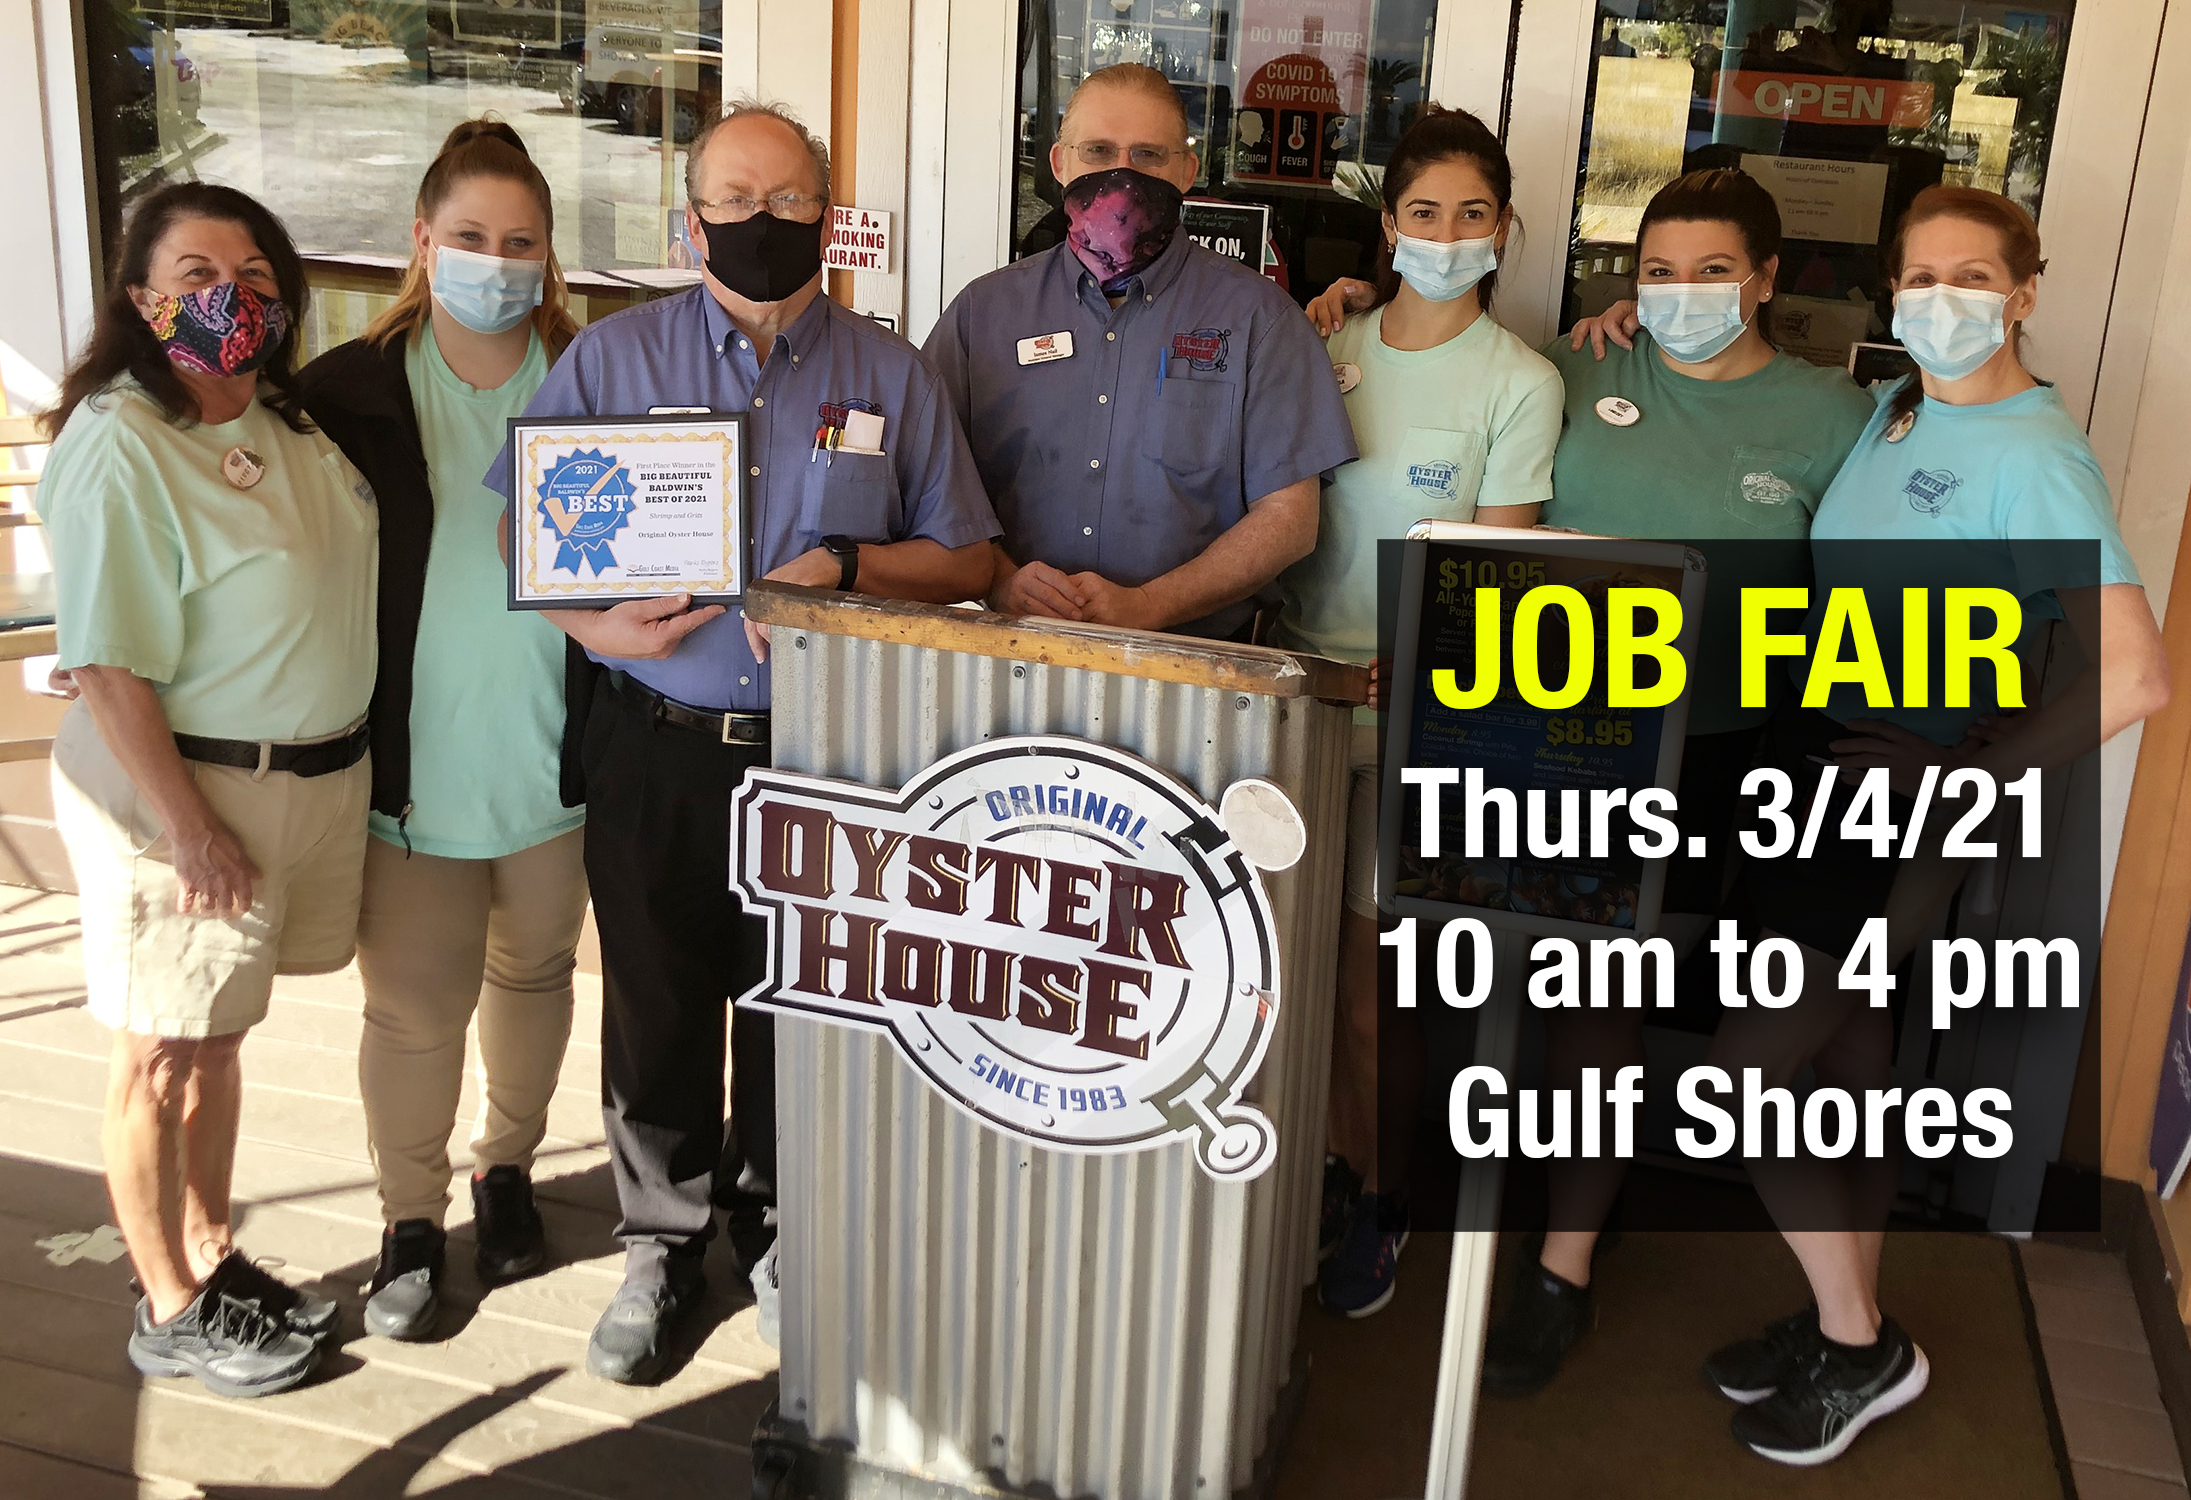 Gulf Shores Original Oyster House is hosting a Job Fair on Thurs. March 2, 2021 from 10 am to 4 pm.